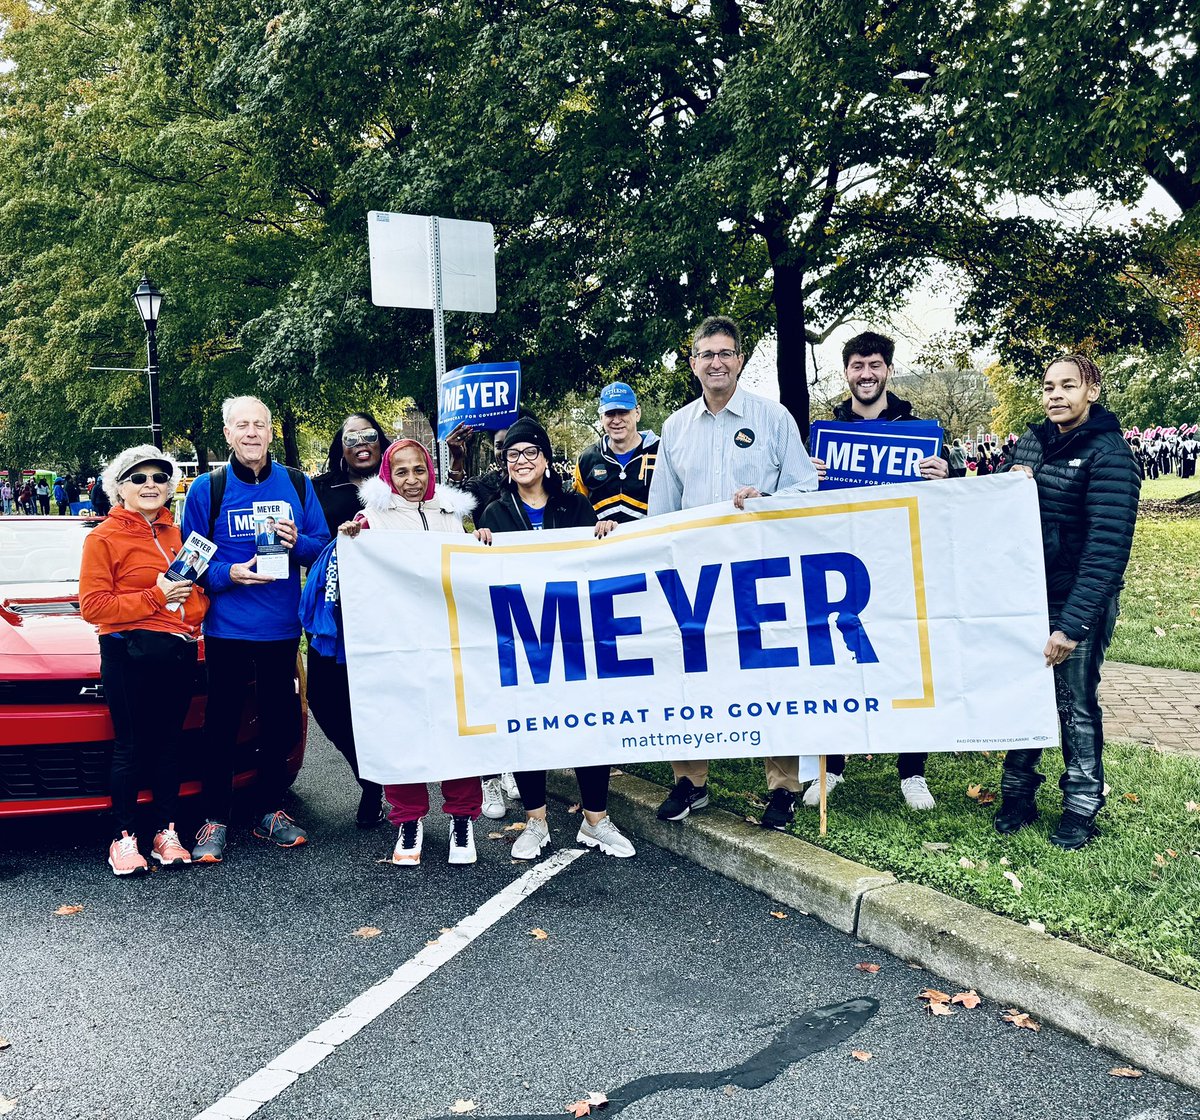 Super fun morning at the @DelStateUniv #HomecomingParade supporting @MattMeyerDE! #AwesomeGroup to spend the morning w/& can’t wait to share the videos & pics of the amazing morning & #INCREDIBLE talent showcased today!💜 Visit👉🏼mattmeyer.org & youtu.be/MaiqwBFfYuc